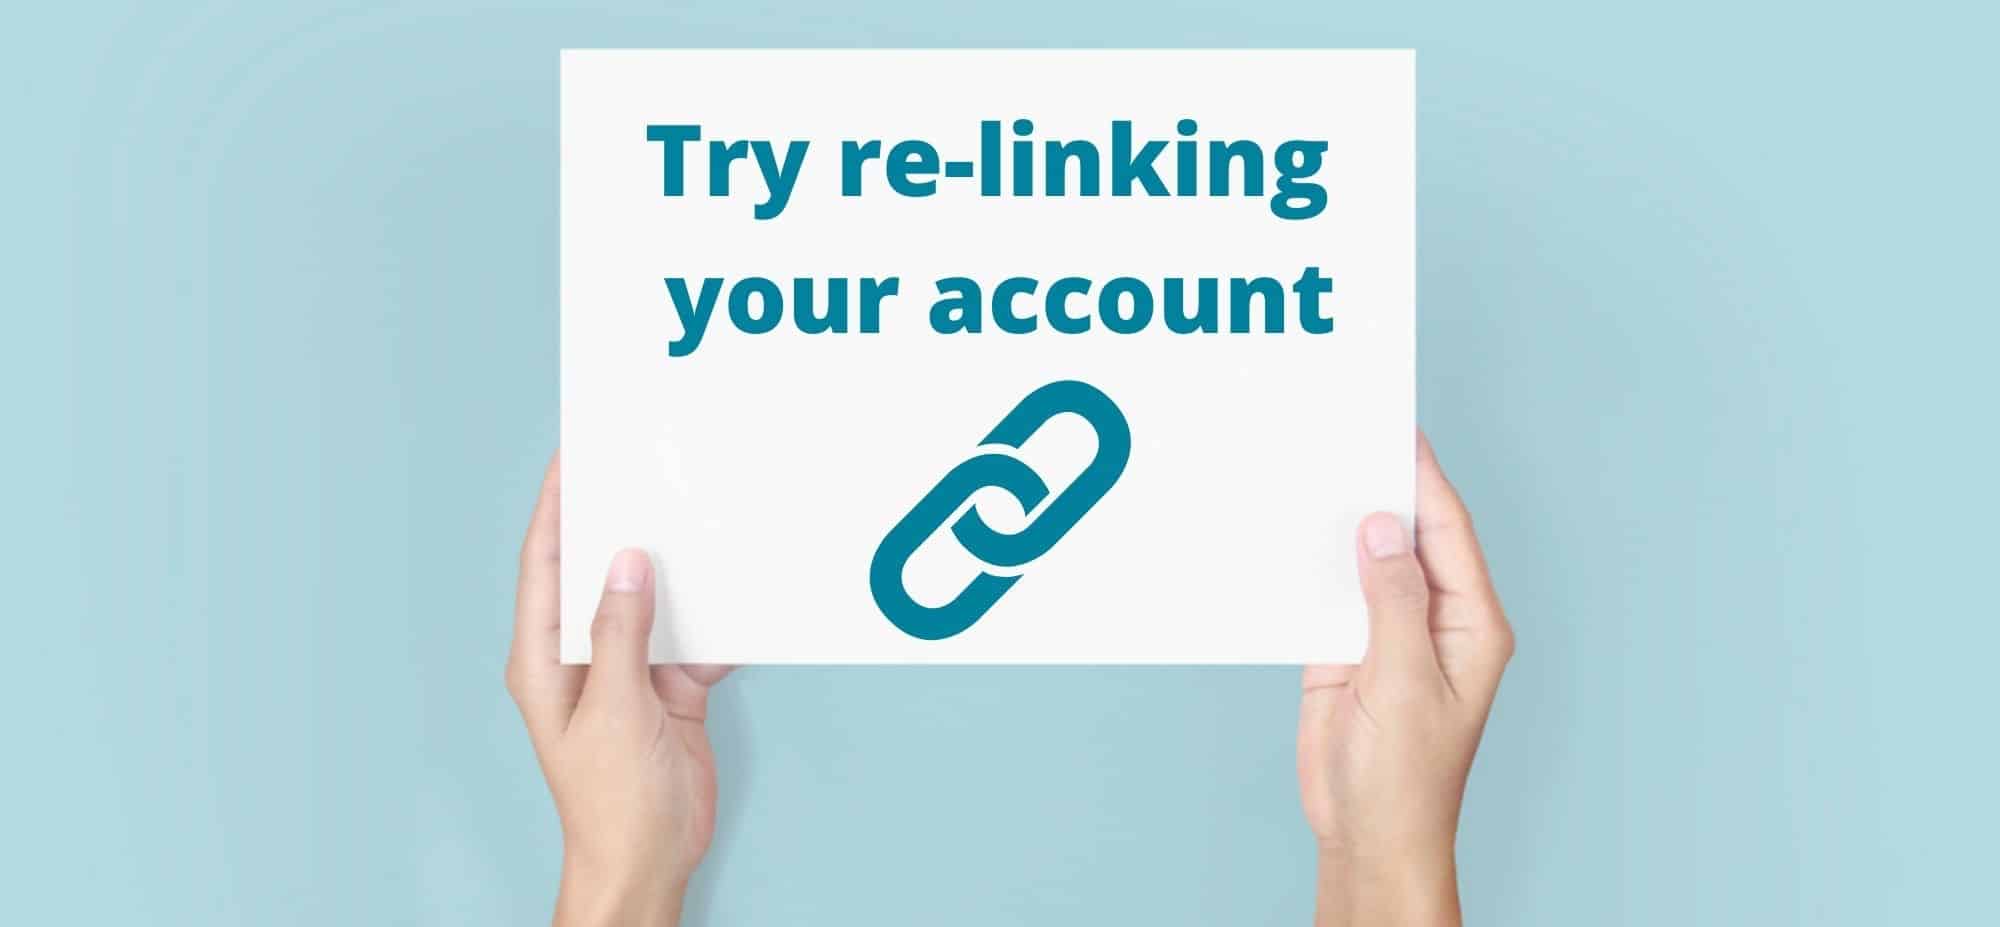 Try re-linking your account